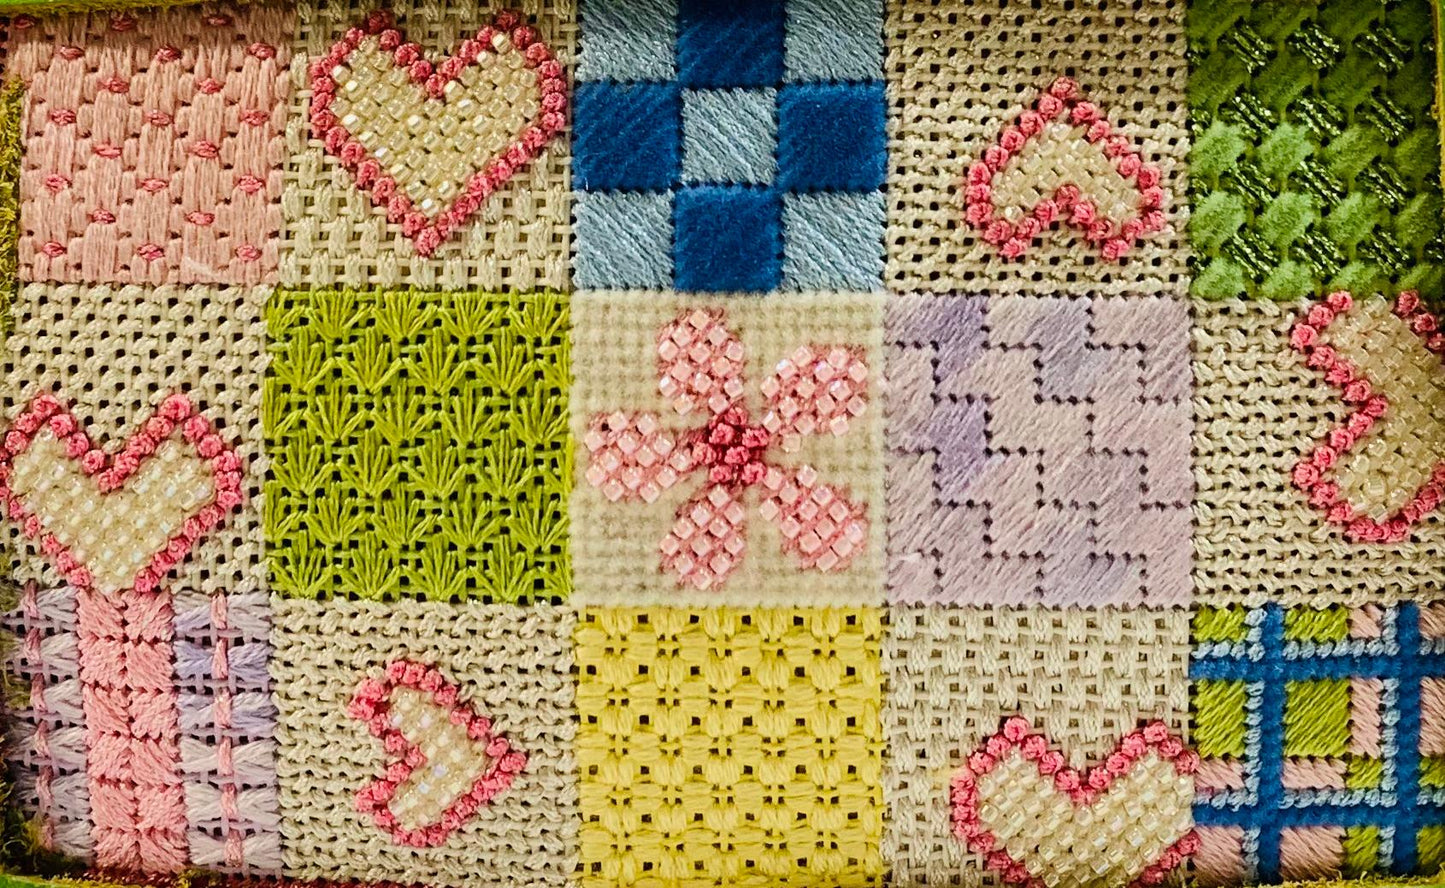 SMF Patchwork Hearts